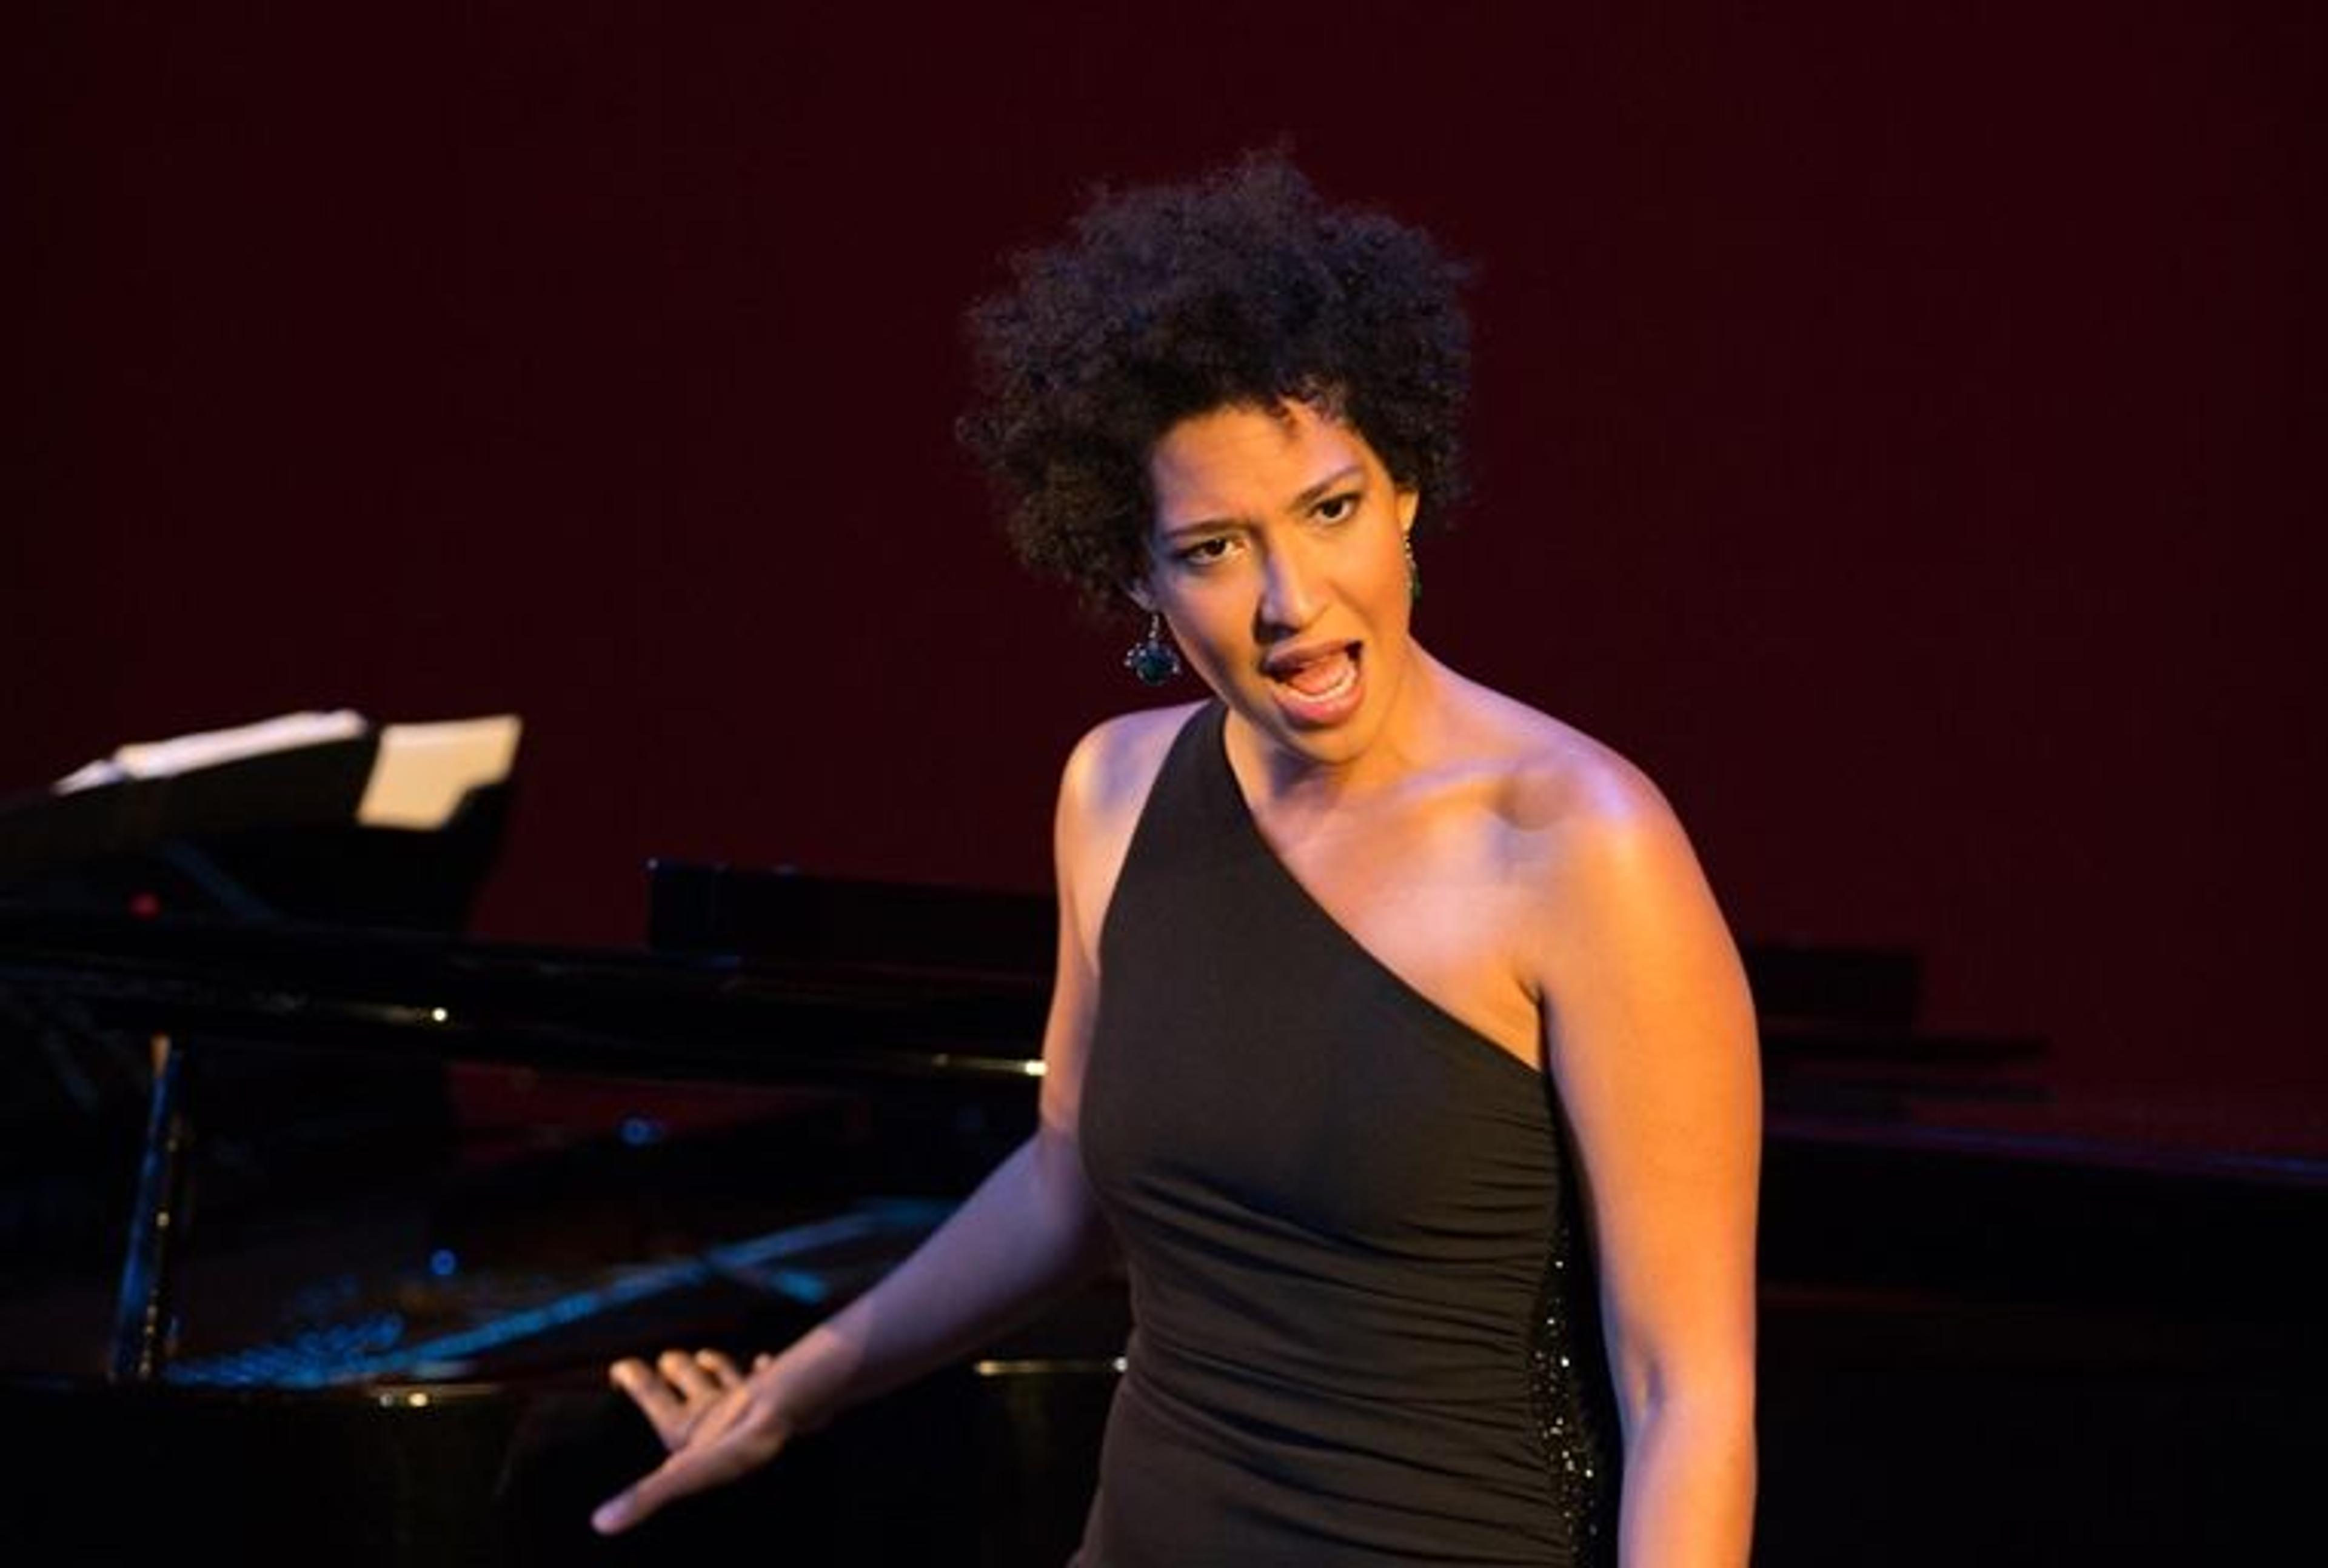 Julia Bullock wearing a black dress and singing in front of a grand piano